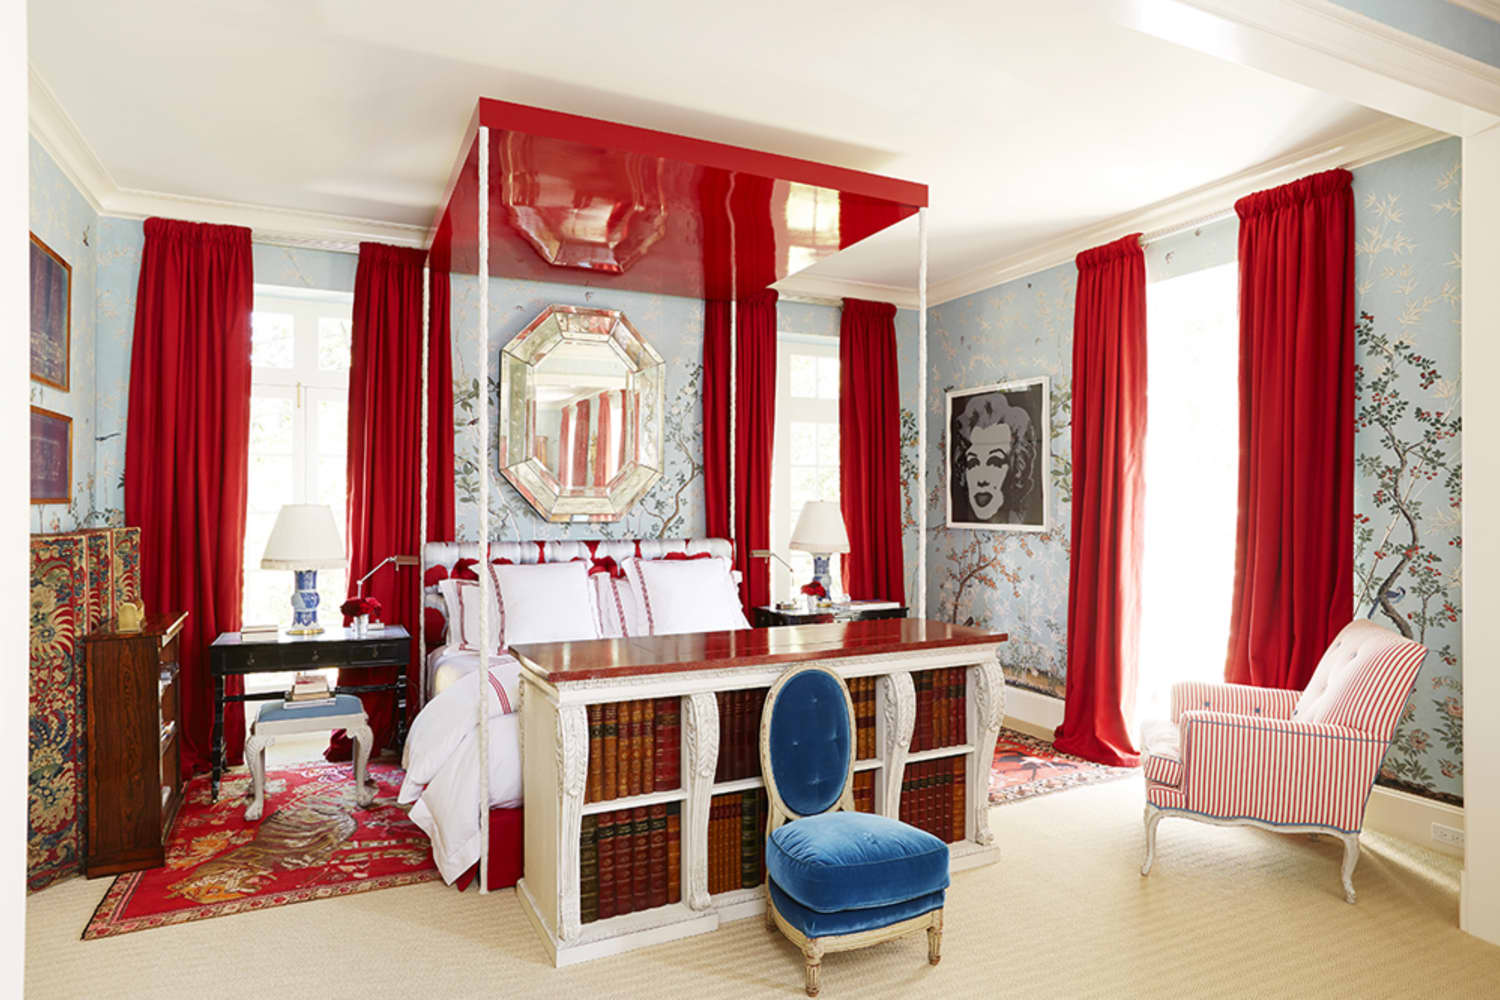 10 Ideas for How to Decorate With Red | Apartment Therapy